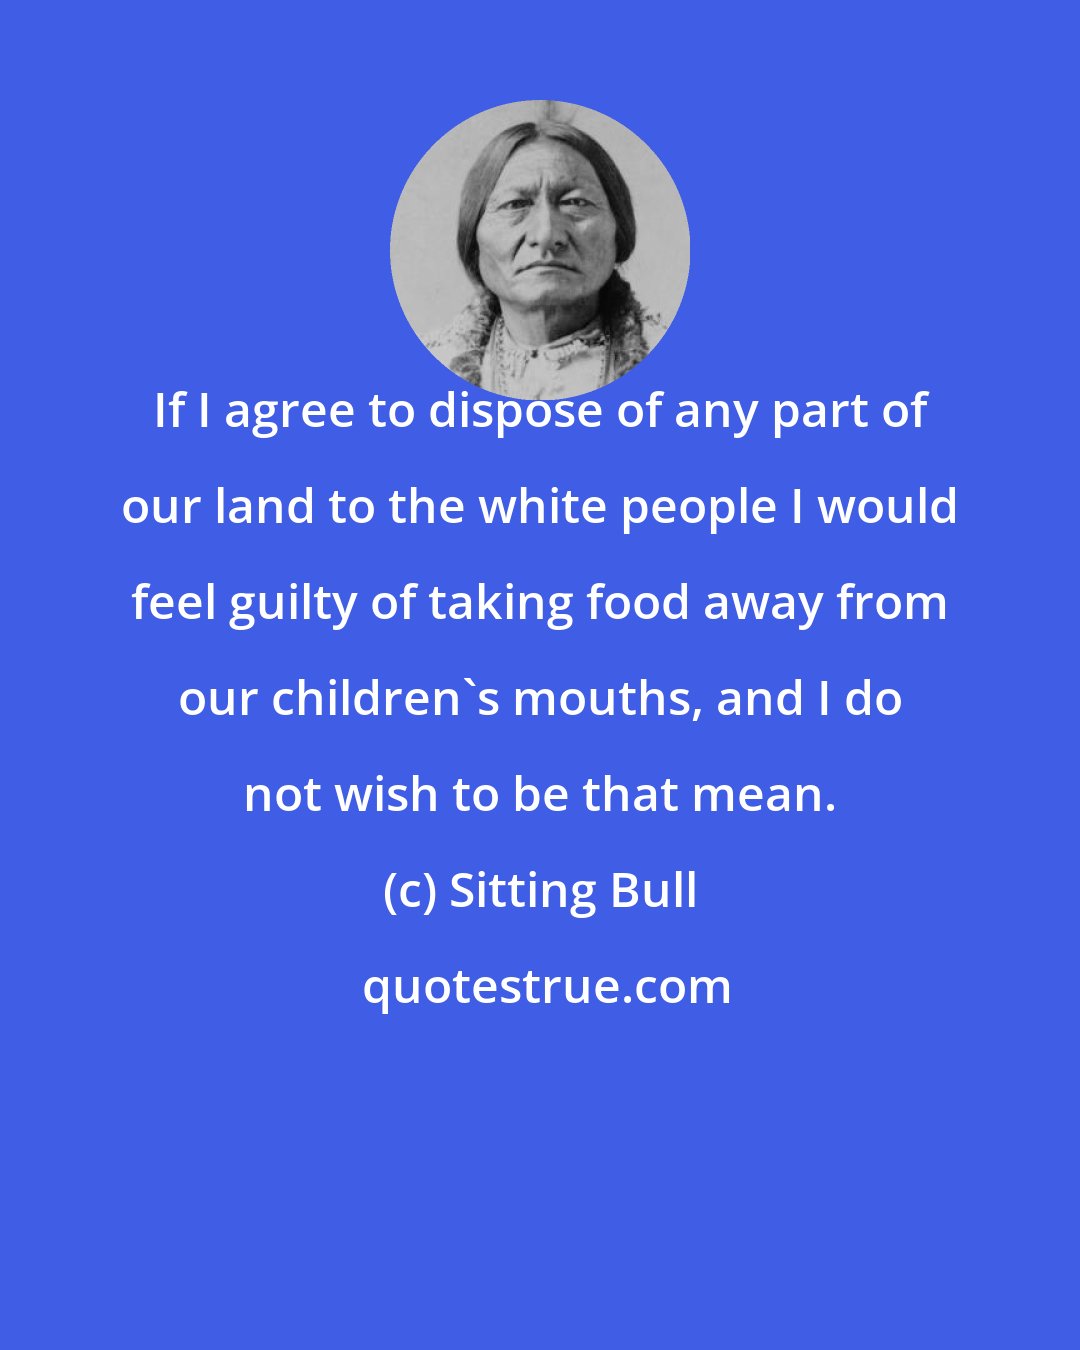 Sitting Bull: If I agree to dispose of any part of our land to the white people I would feel guilty of taking food away from our children's mouths, and I do not wish to be that mean.